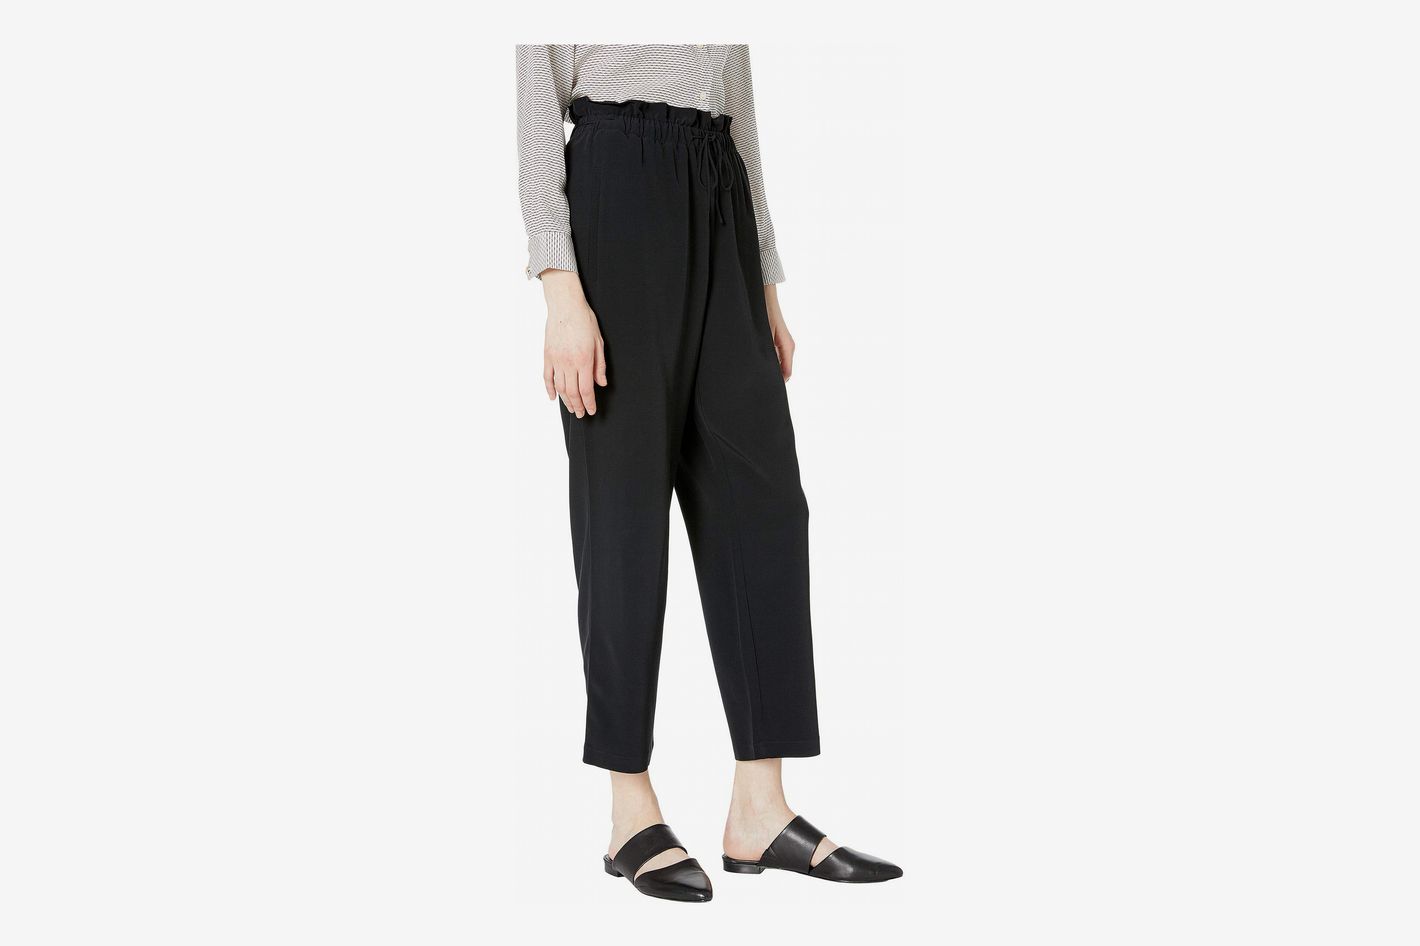 Looking for a pair of pants with this style/feel but with travel-savvy  features (quick dry, packable/lightweight, wrinkle free is a plus). Any  ideas? : r/HerOneBag